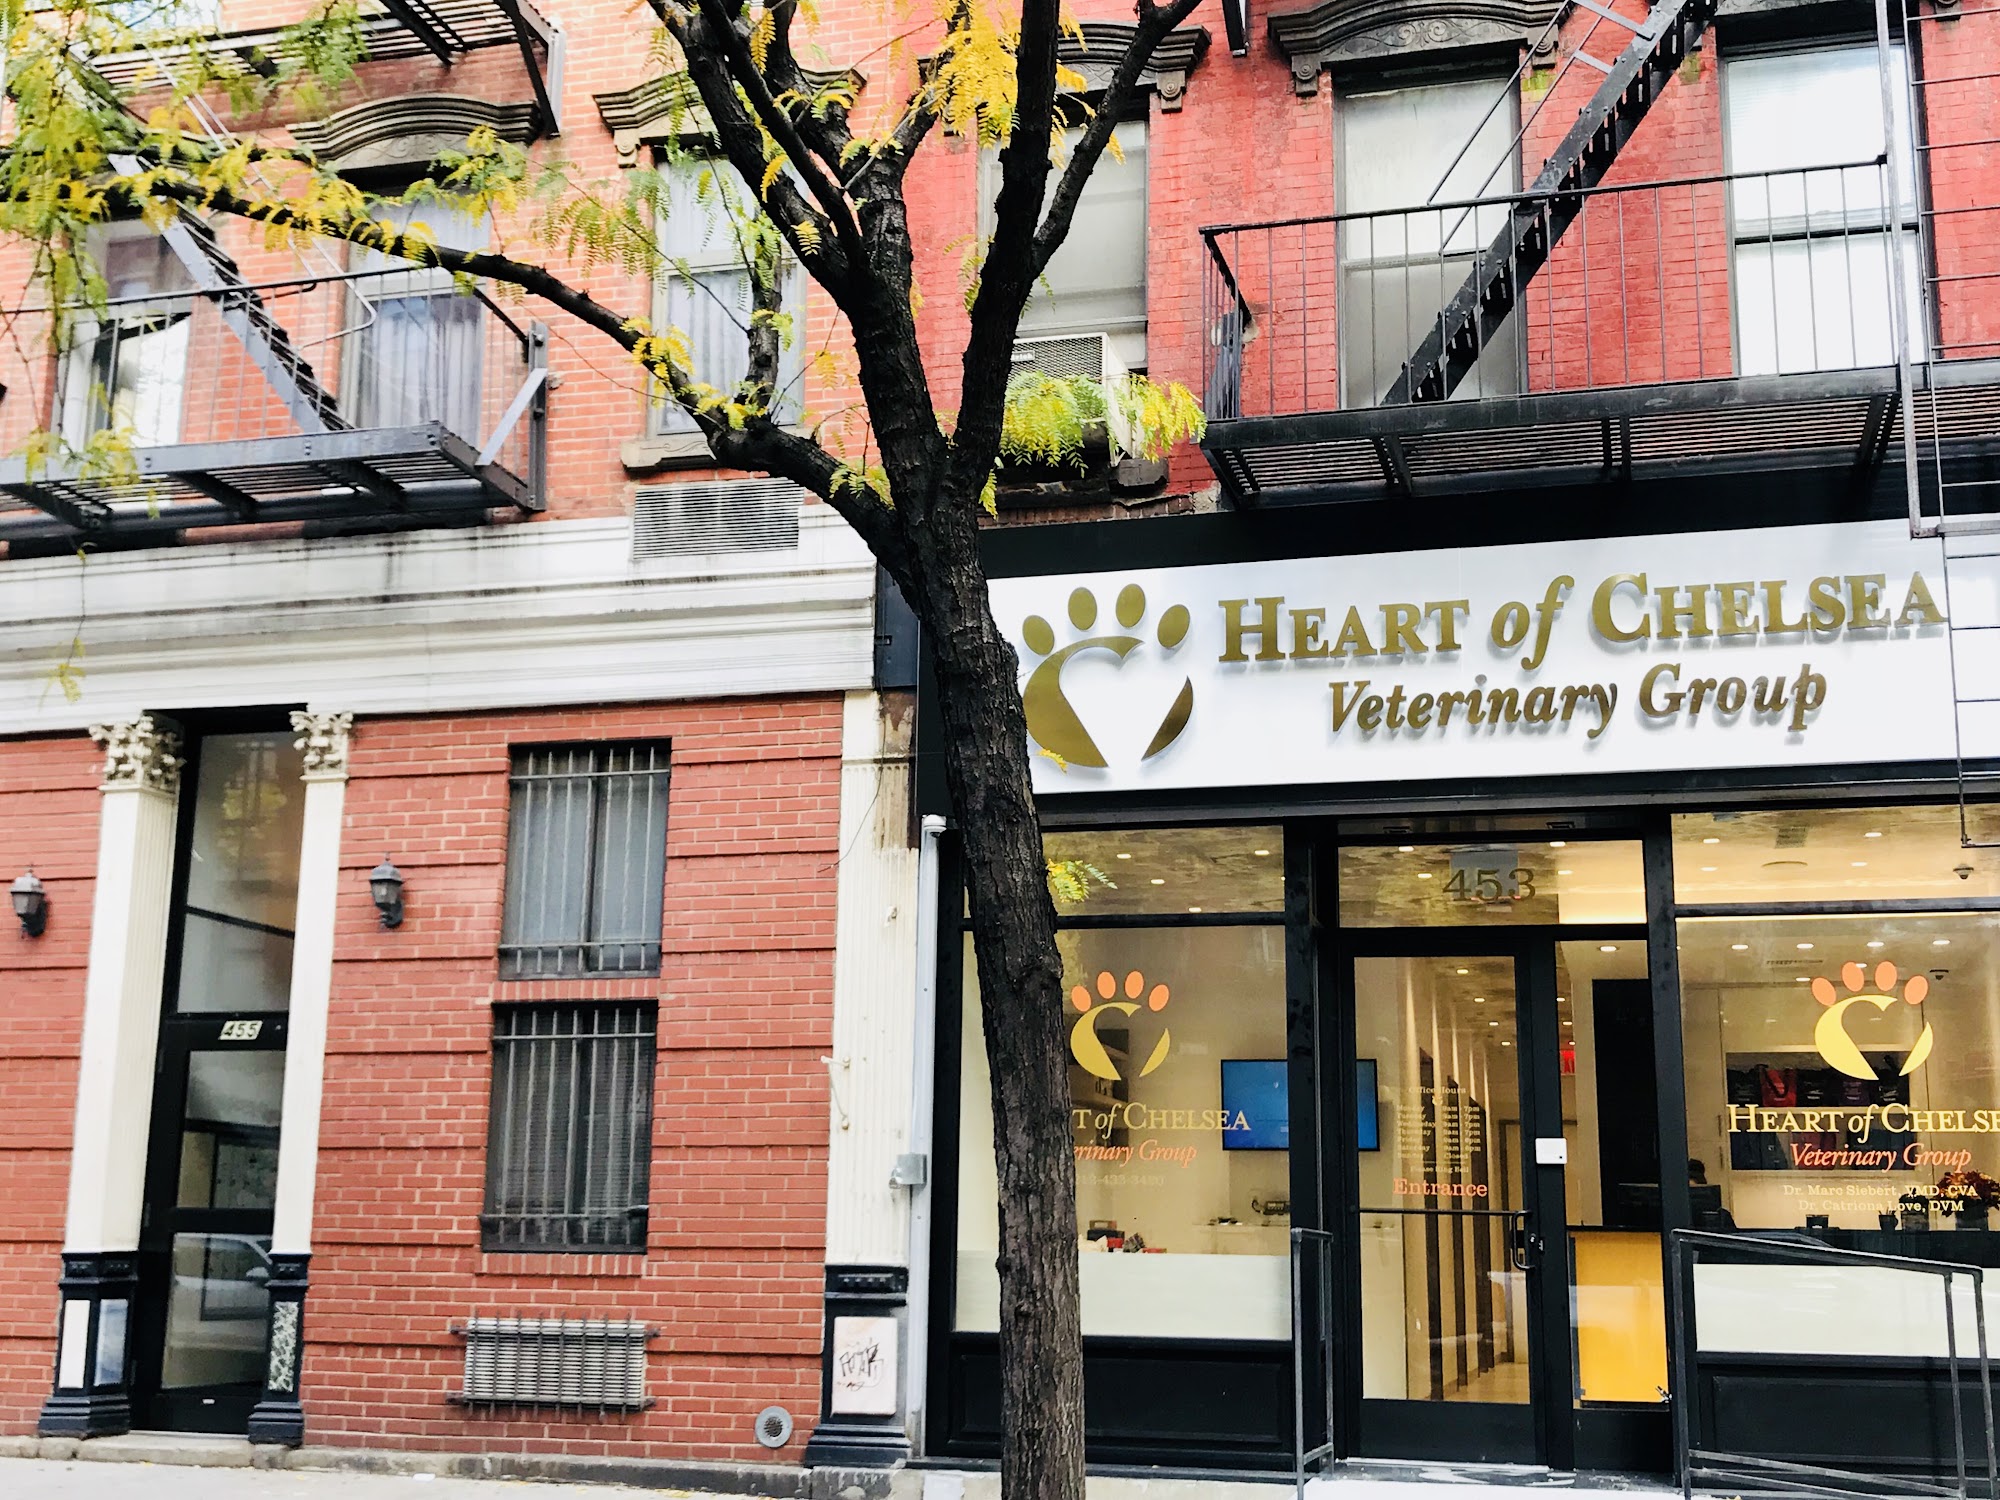 Heart of Chelsea Veterinary Group - Hell's Kitchen